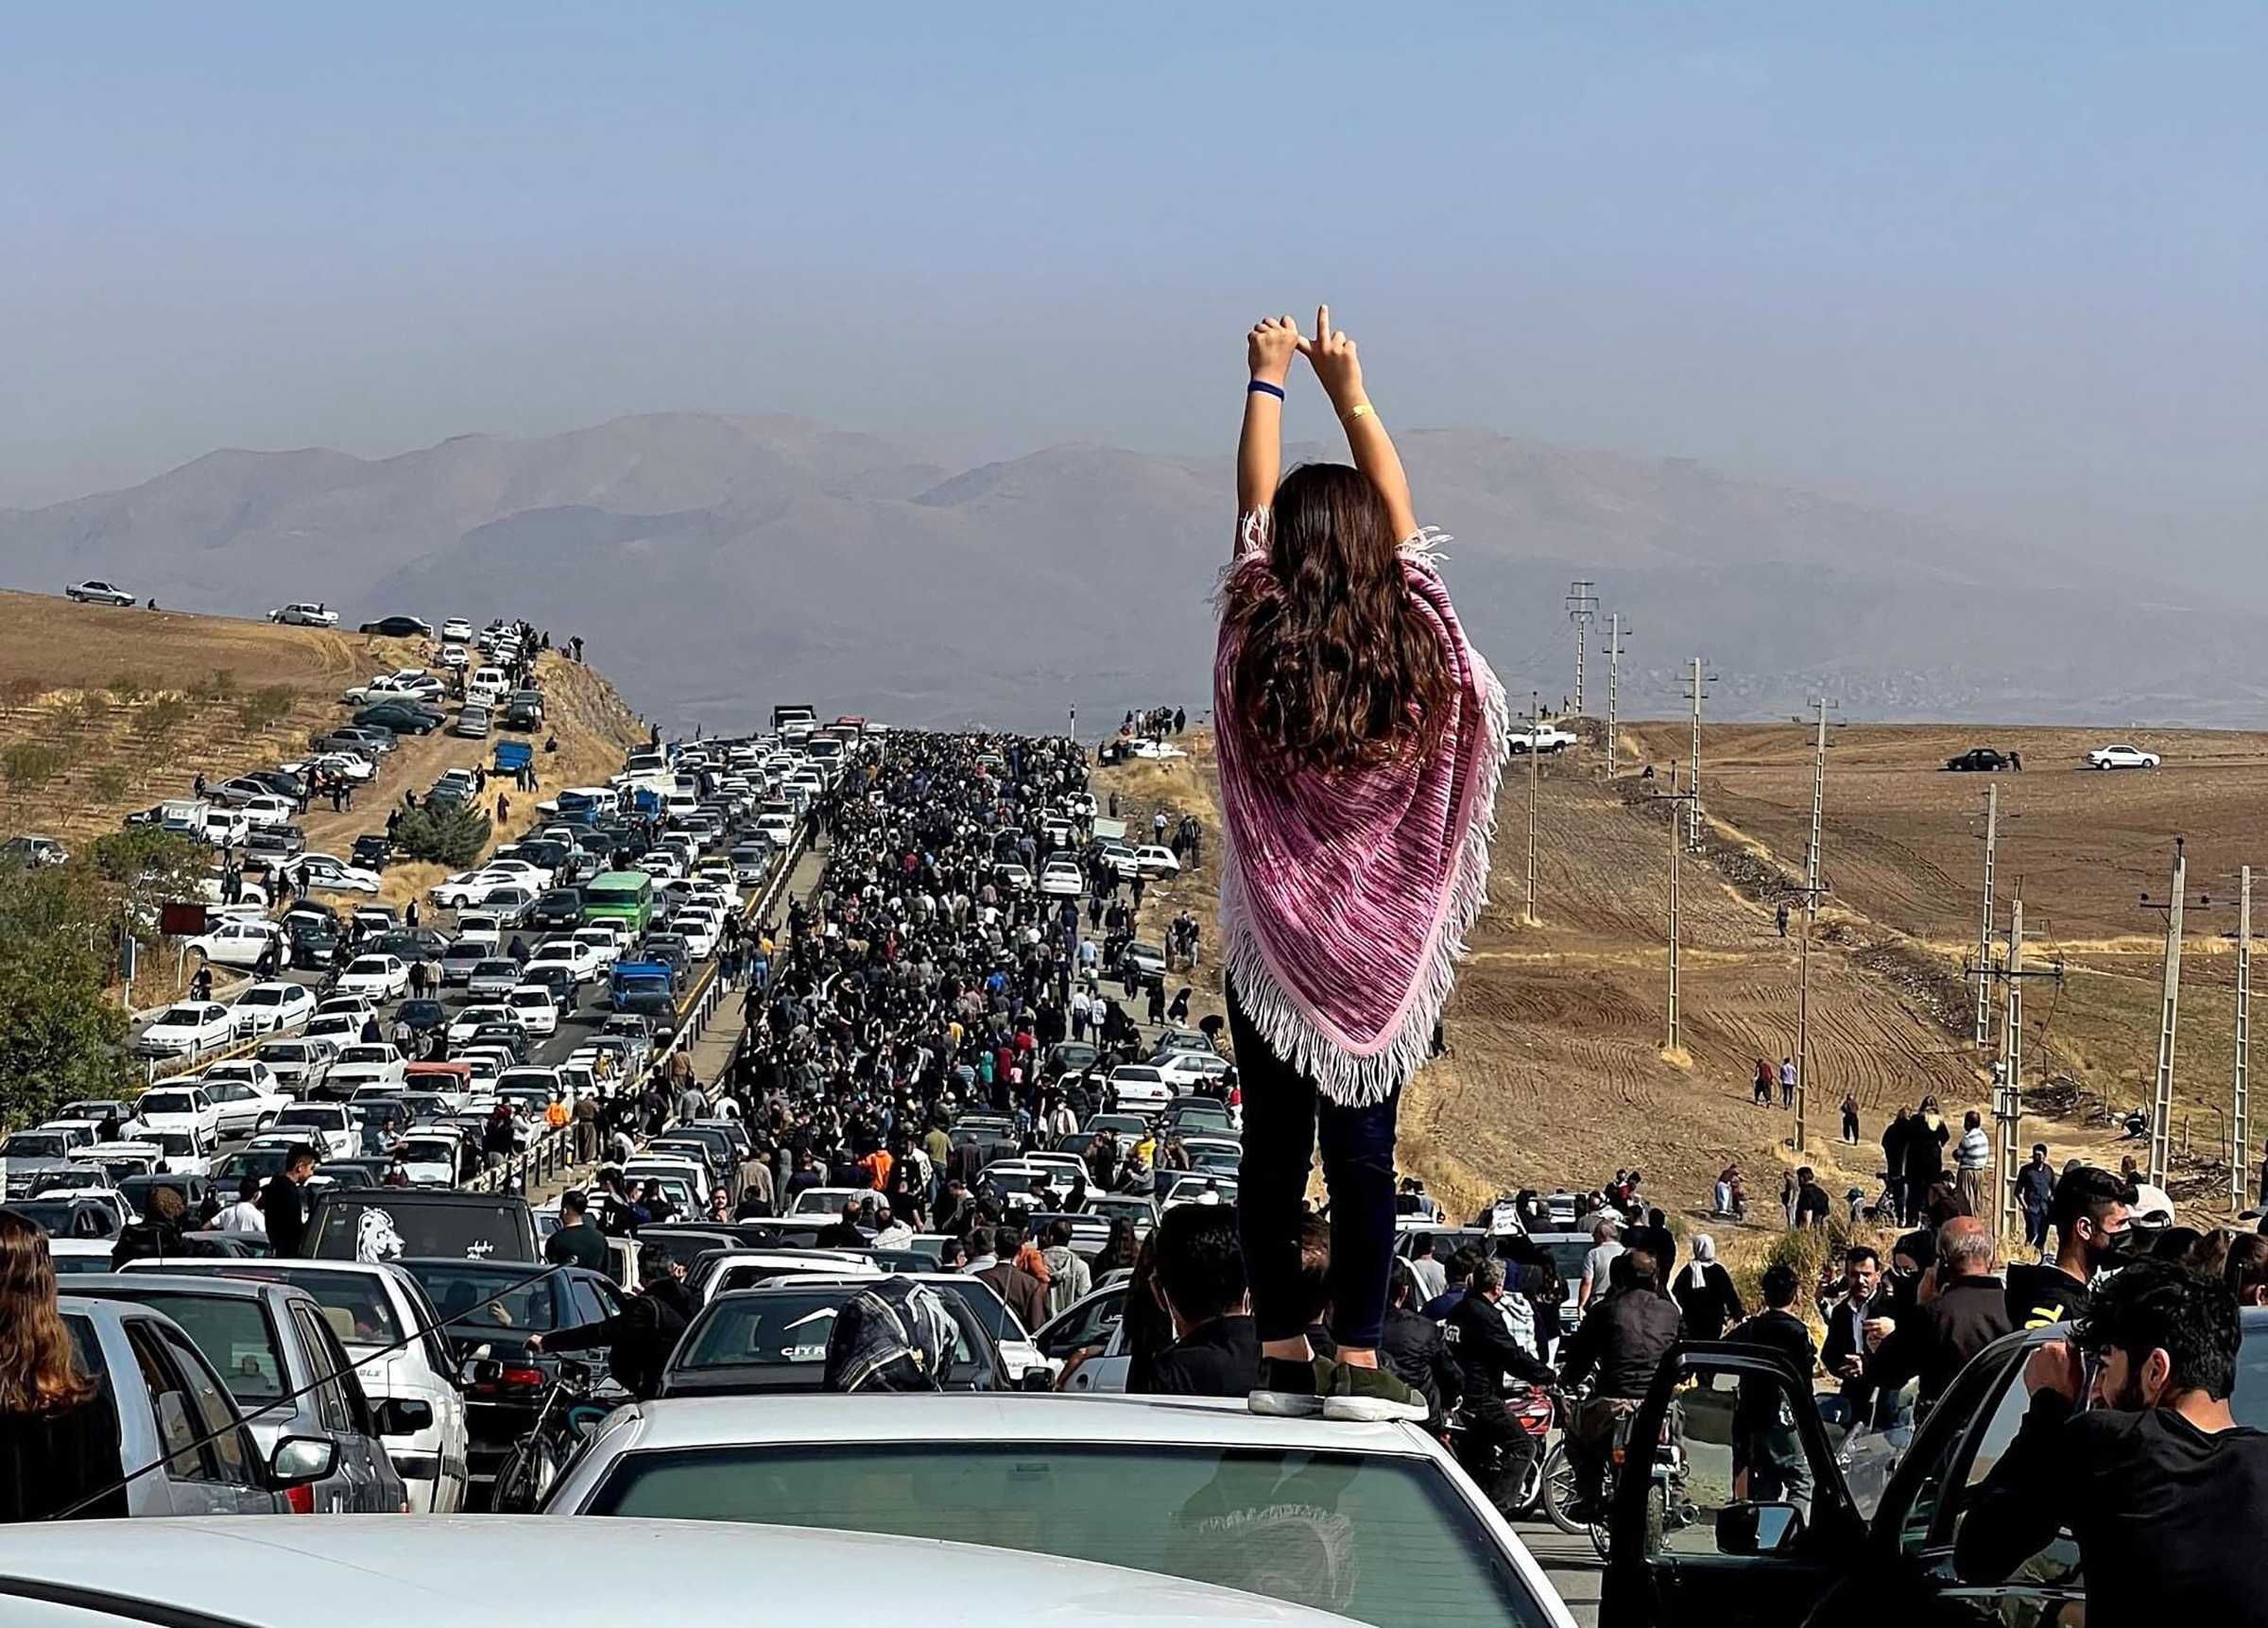 An unveiled woman standing on top of a vehicle as thousands make their way towards Aichi cemetery in Saqez, Mahsa Amini's home town in the western Iranian province of Kurdistan, to mark 40 days since her death, defying heightened security measures as part of a bloody crackdown on women-led protests. (UGC/AFP/Getty Images)